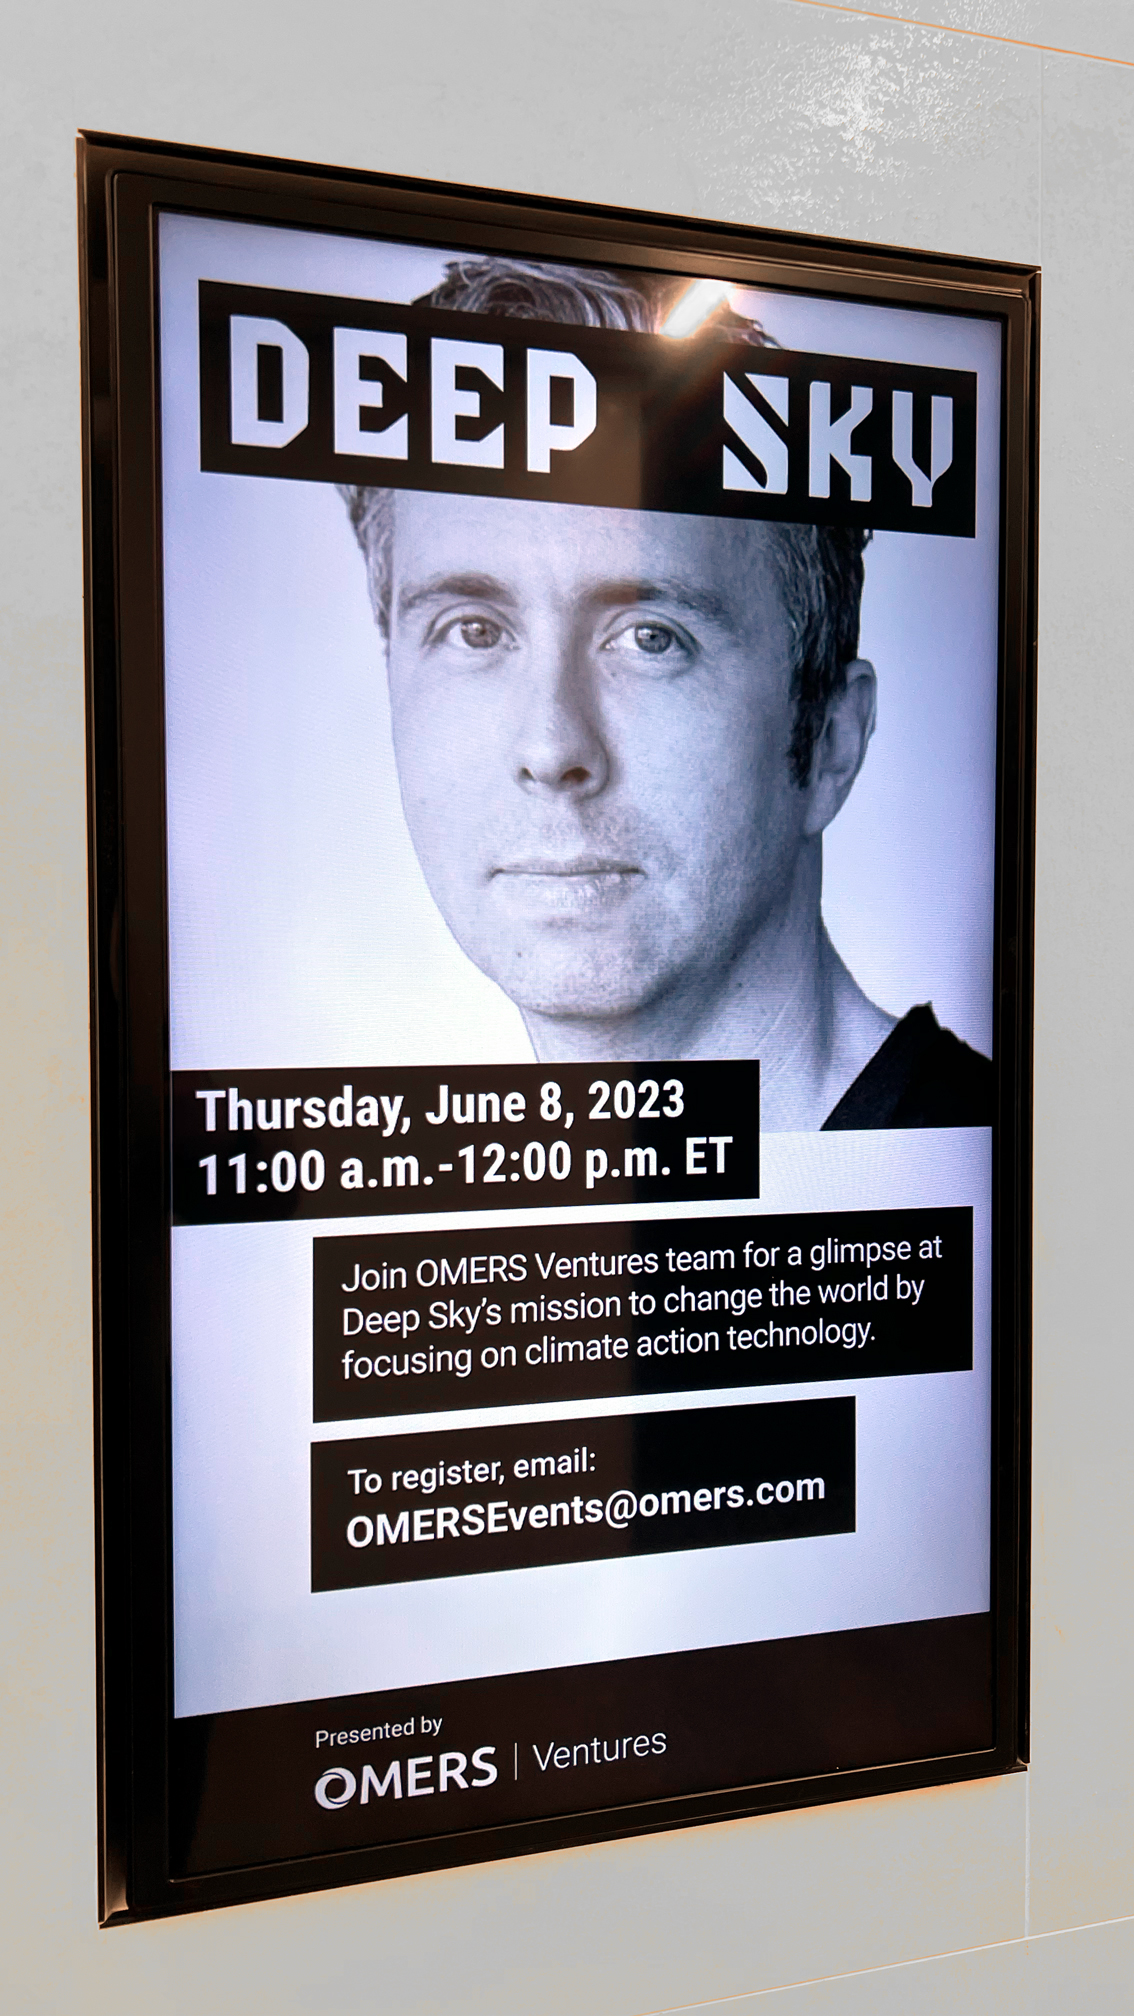 Poster for event featuring the CEO of Deep Sky